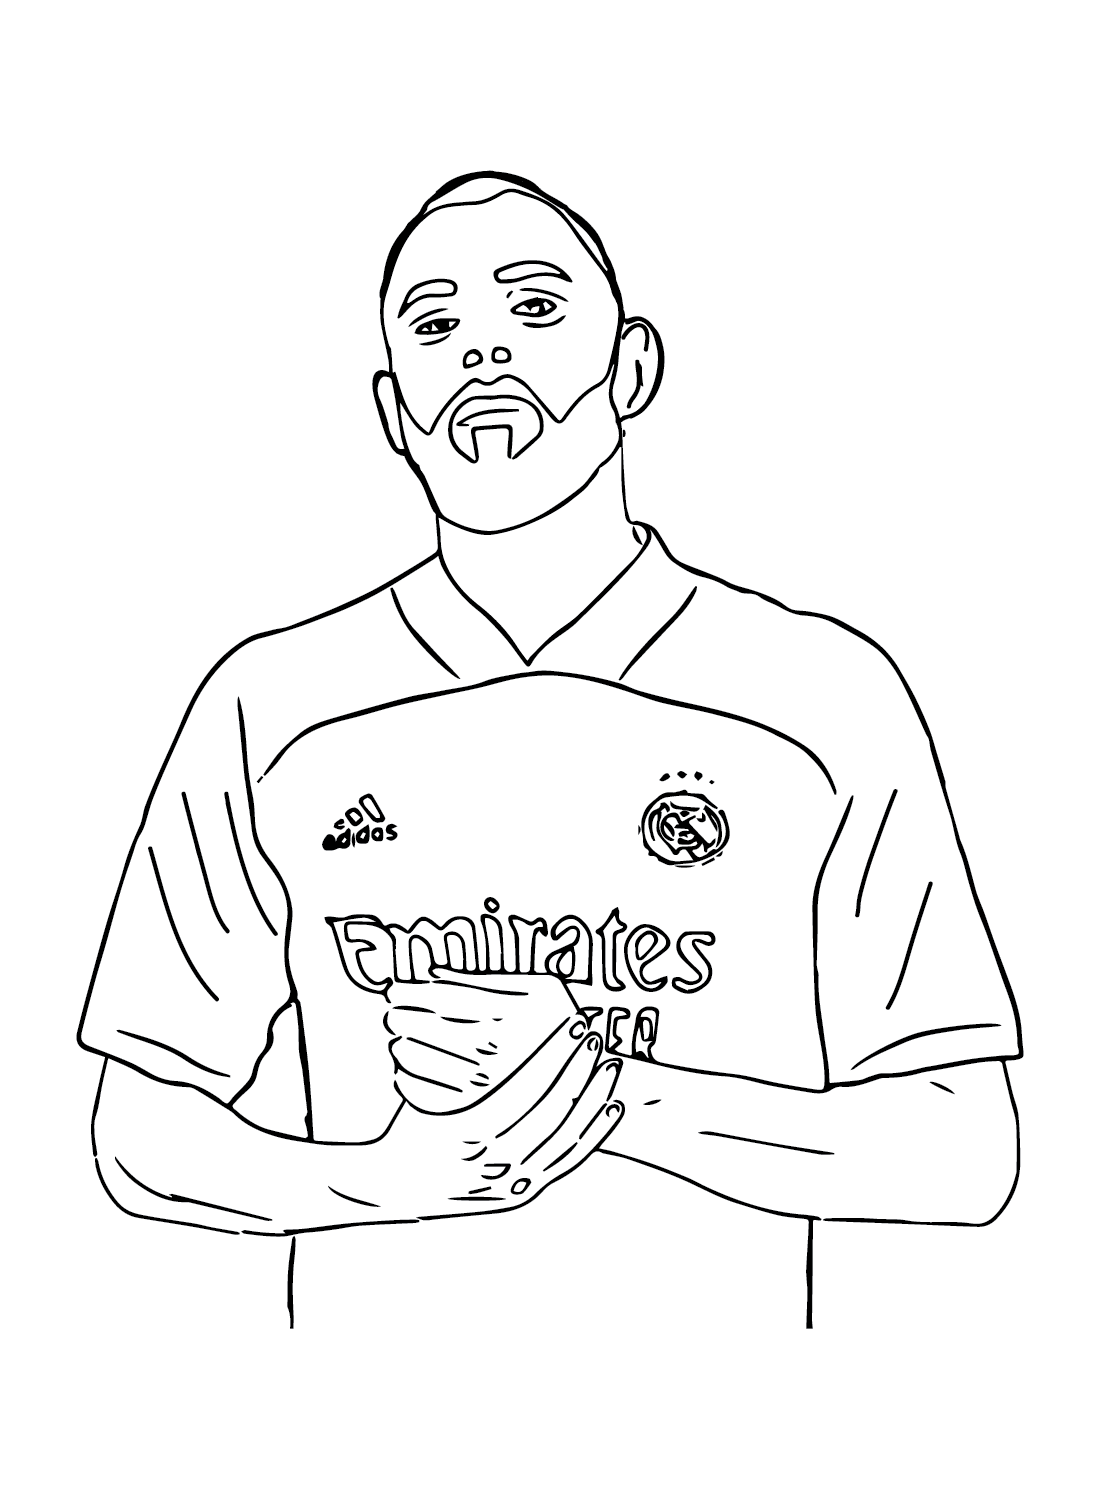 Karim Benzema Soccer Player Coloring Page